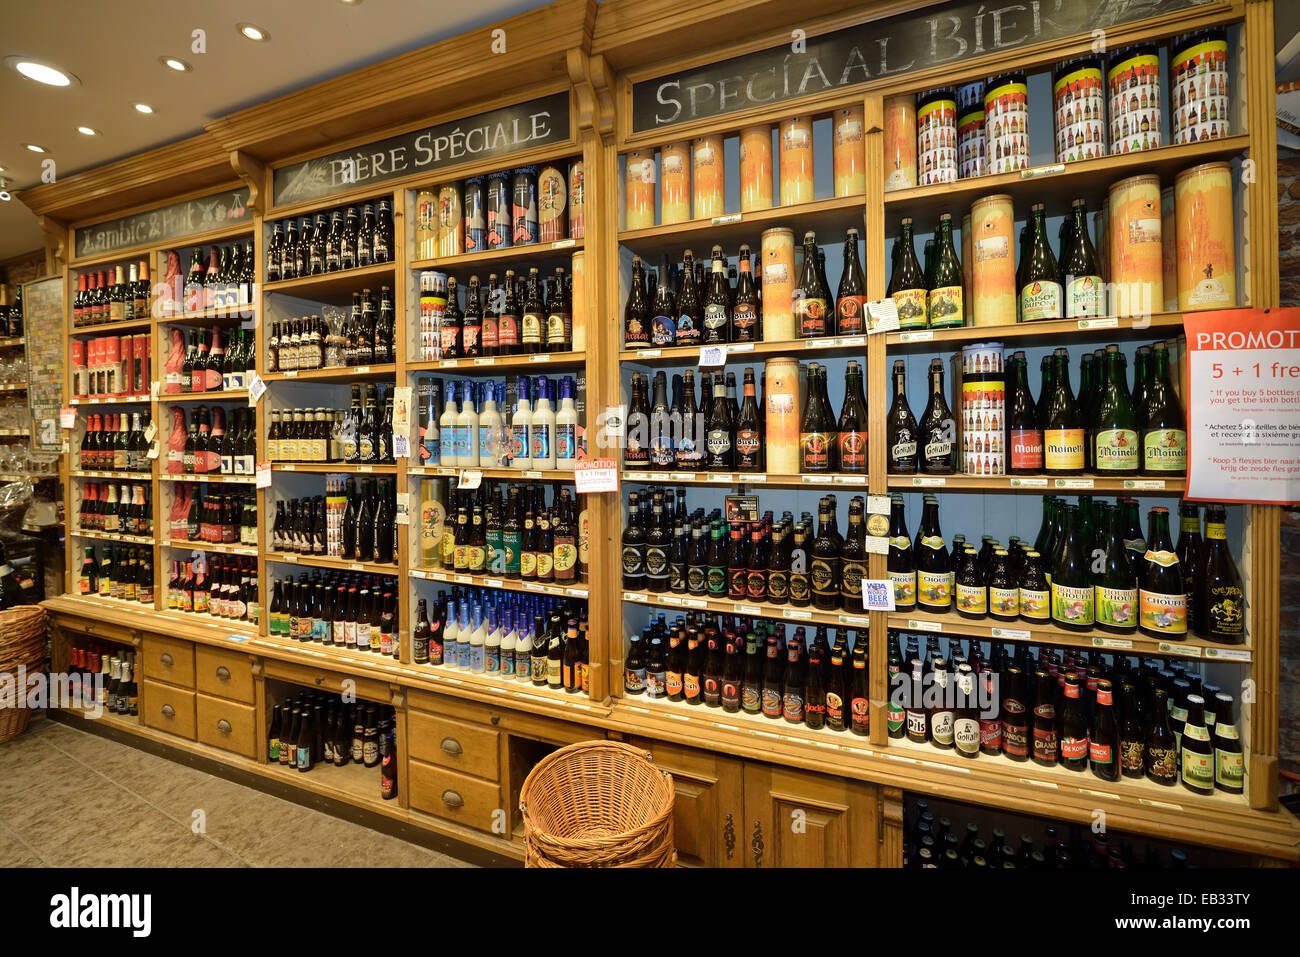 Shelf with different types of beer in a liquor store, Brussels, Brussels Region, Belgium Stock Photo